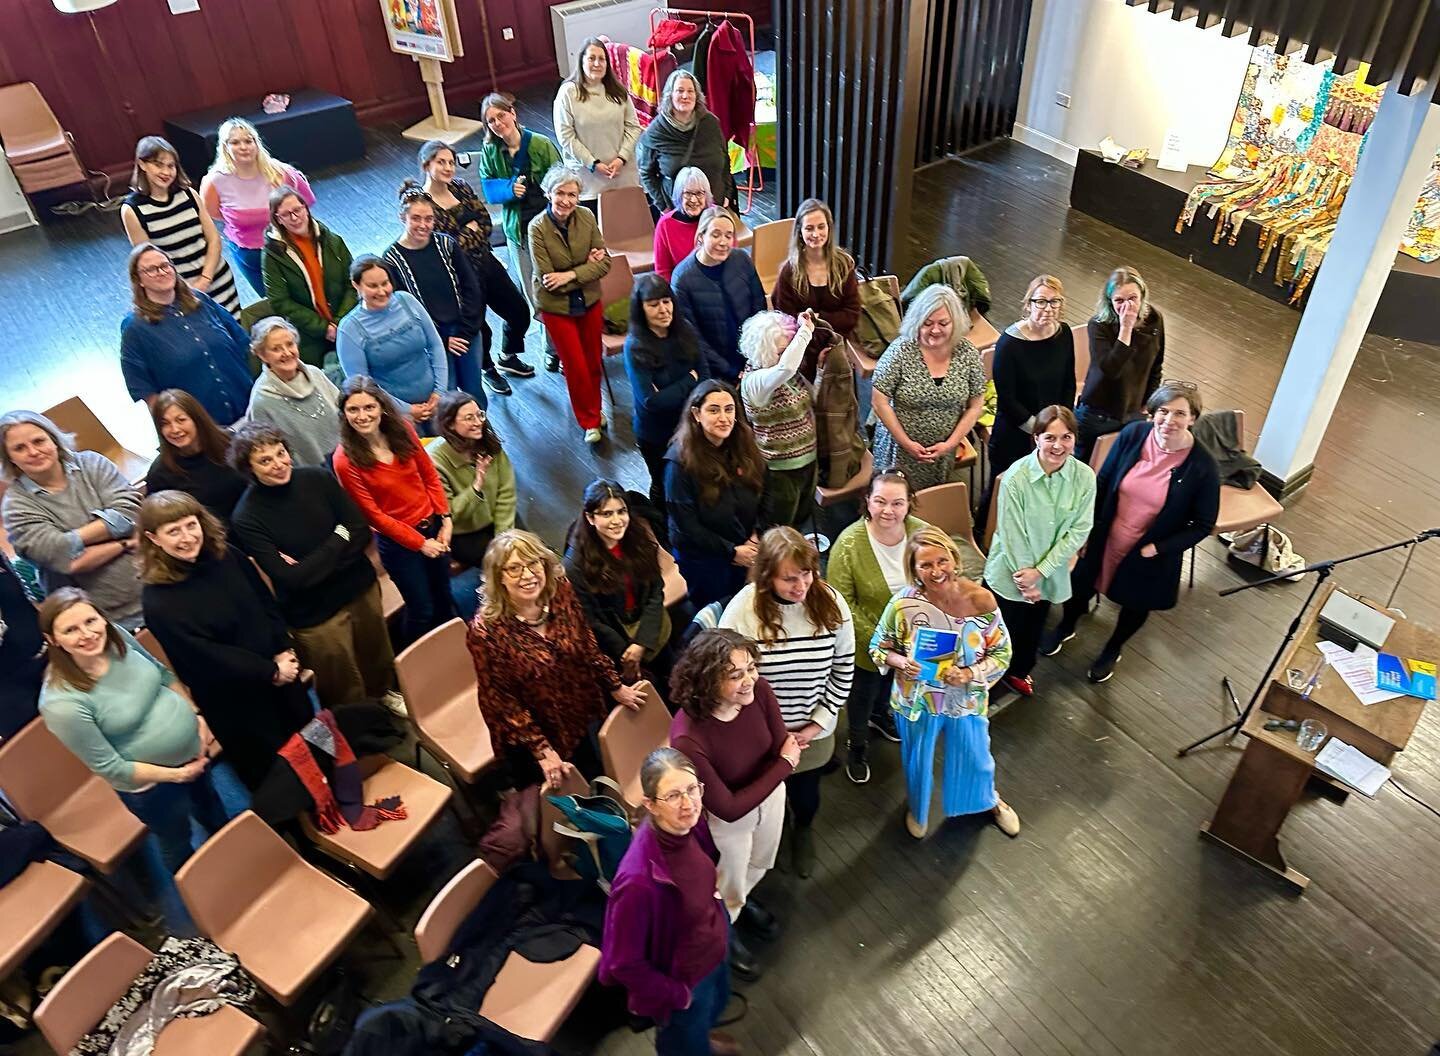 What a joy! To launch my book What if Women Designed the City?  in the historic @womenslibrary facilitated by thoughtful award winner architect @judebarber100 with inspirational keynote observer @cllrhollybruce in great company of women interested in